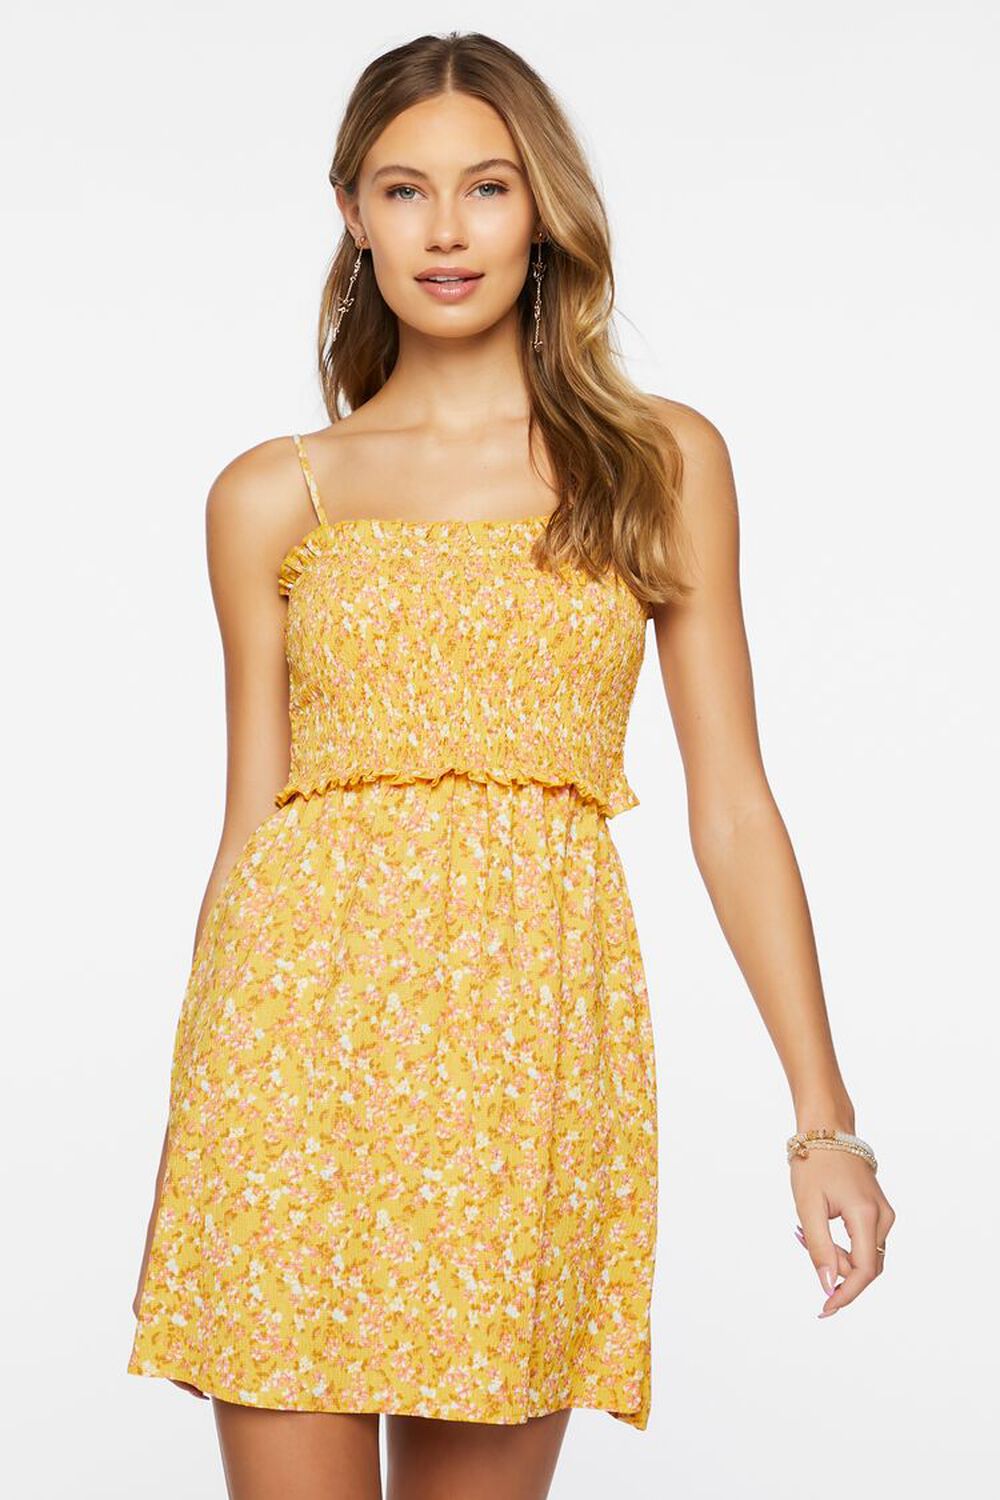 YELLOW/MULTI Ditsy Floral Smocked Mini Dress, image 1